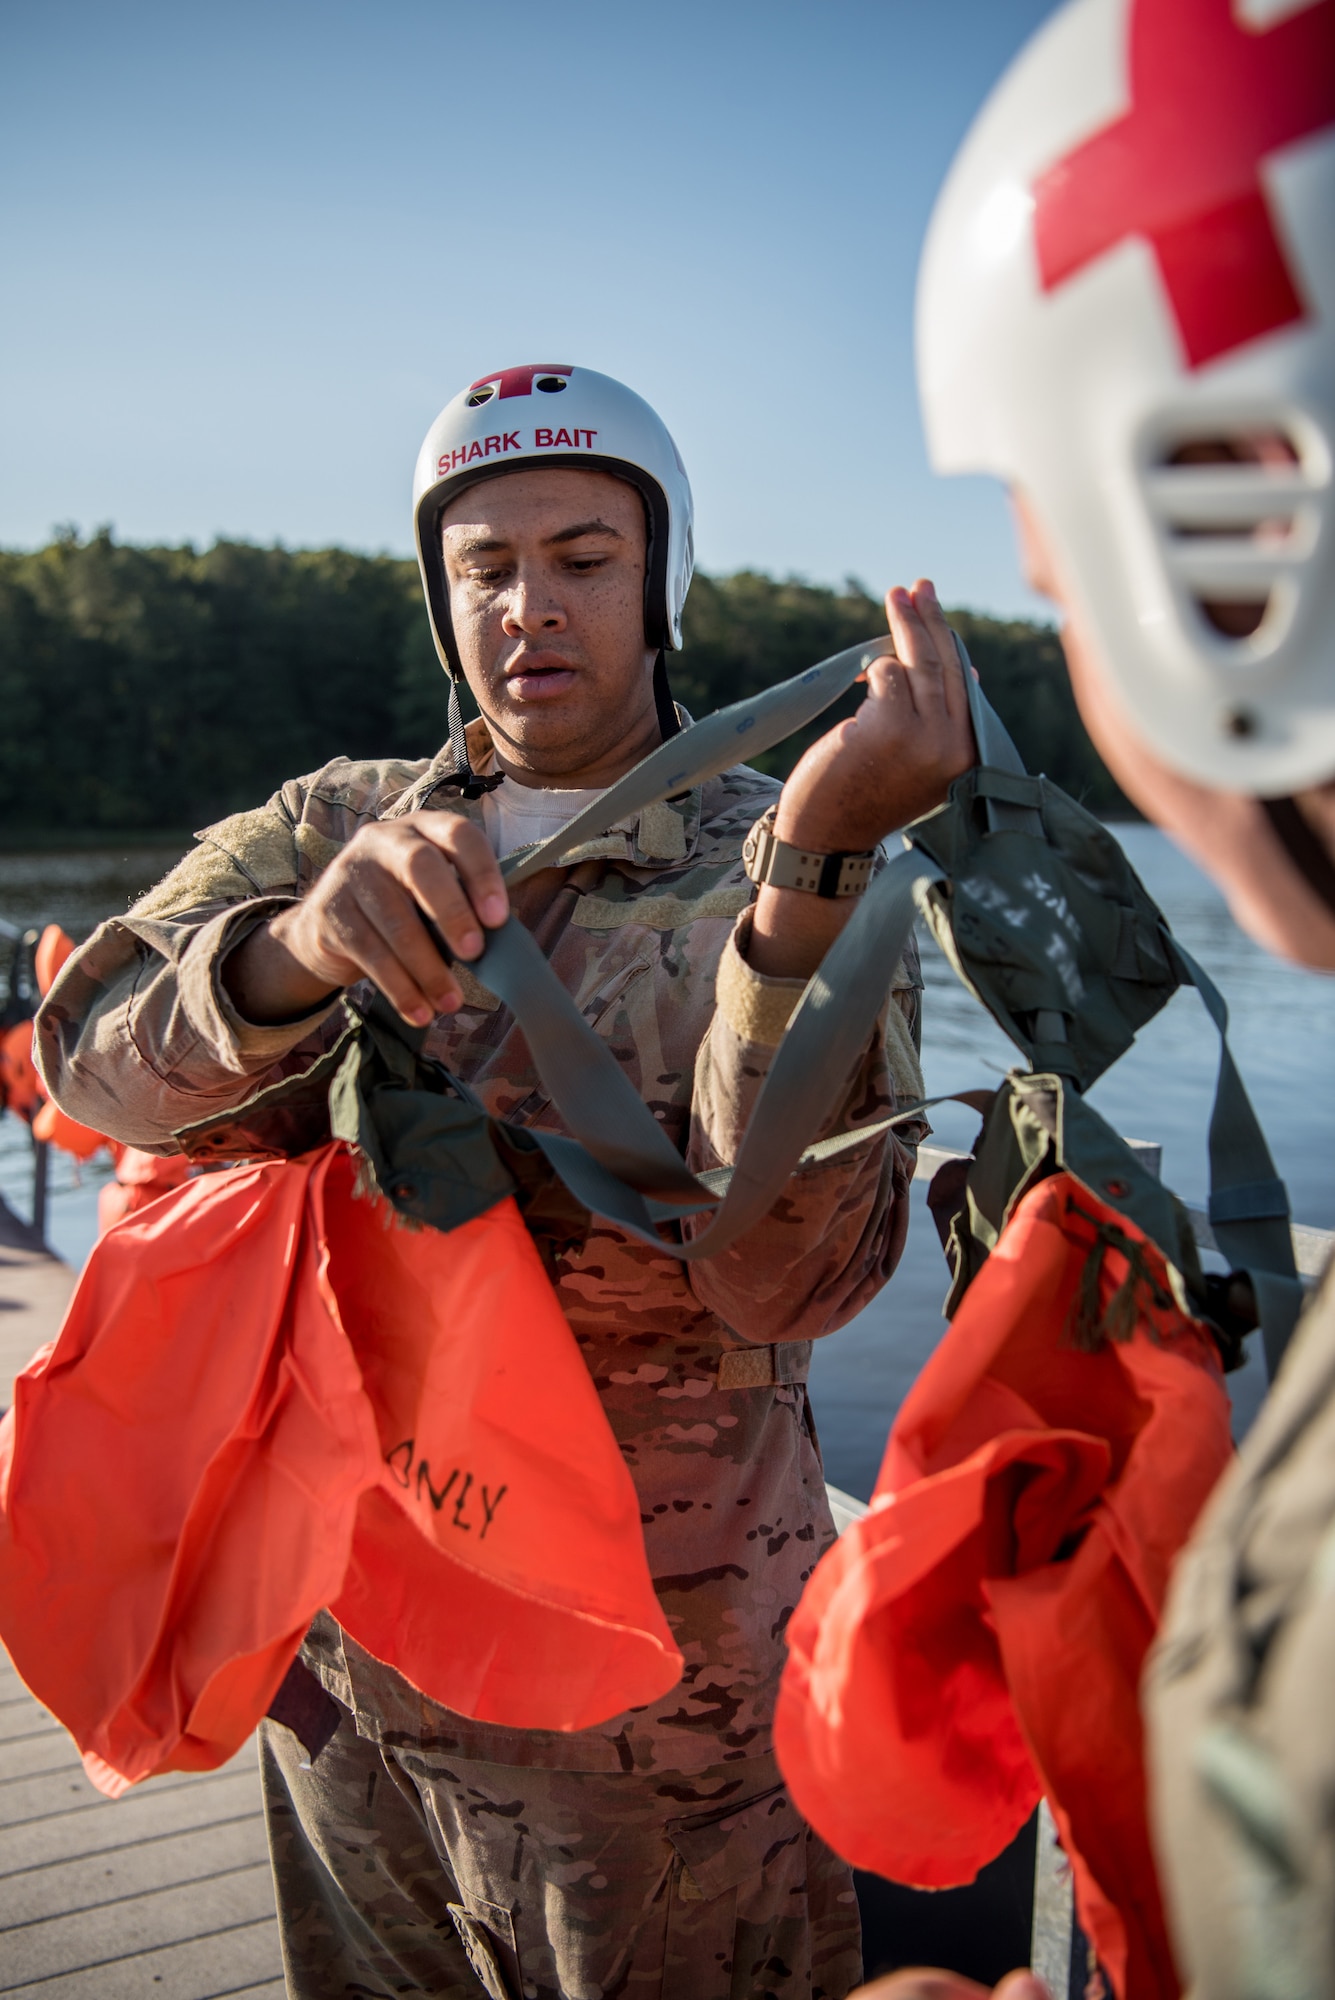 Staff Sgt. Kierre Brown, a loadmaster for the Kentucky Air National Guard’s 165th Airlift Squadron, straps on a parachute harness prior to water survival training at Camp Crooked Creek in Shepherdsville, Ky., Sept. 14, 2019. The training also covered land survival techniques and orienteering. (U.S. Air National Guard photo by Staff Sgt. Joshua Horton)